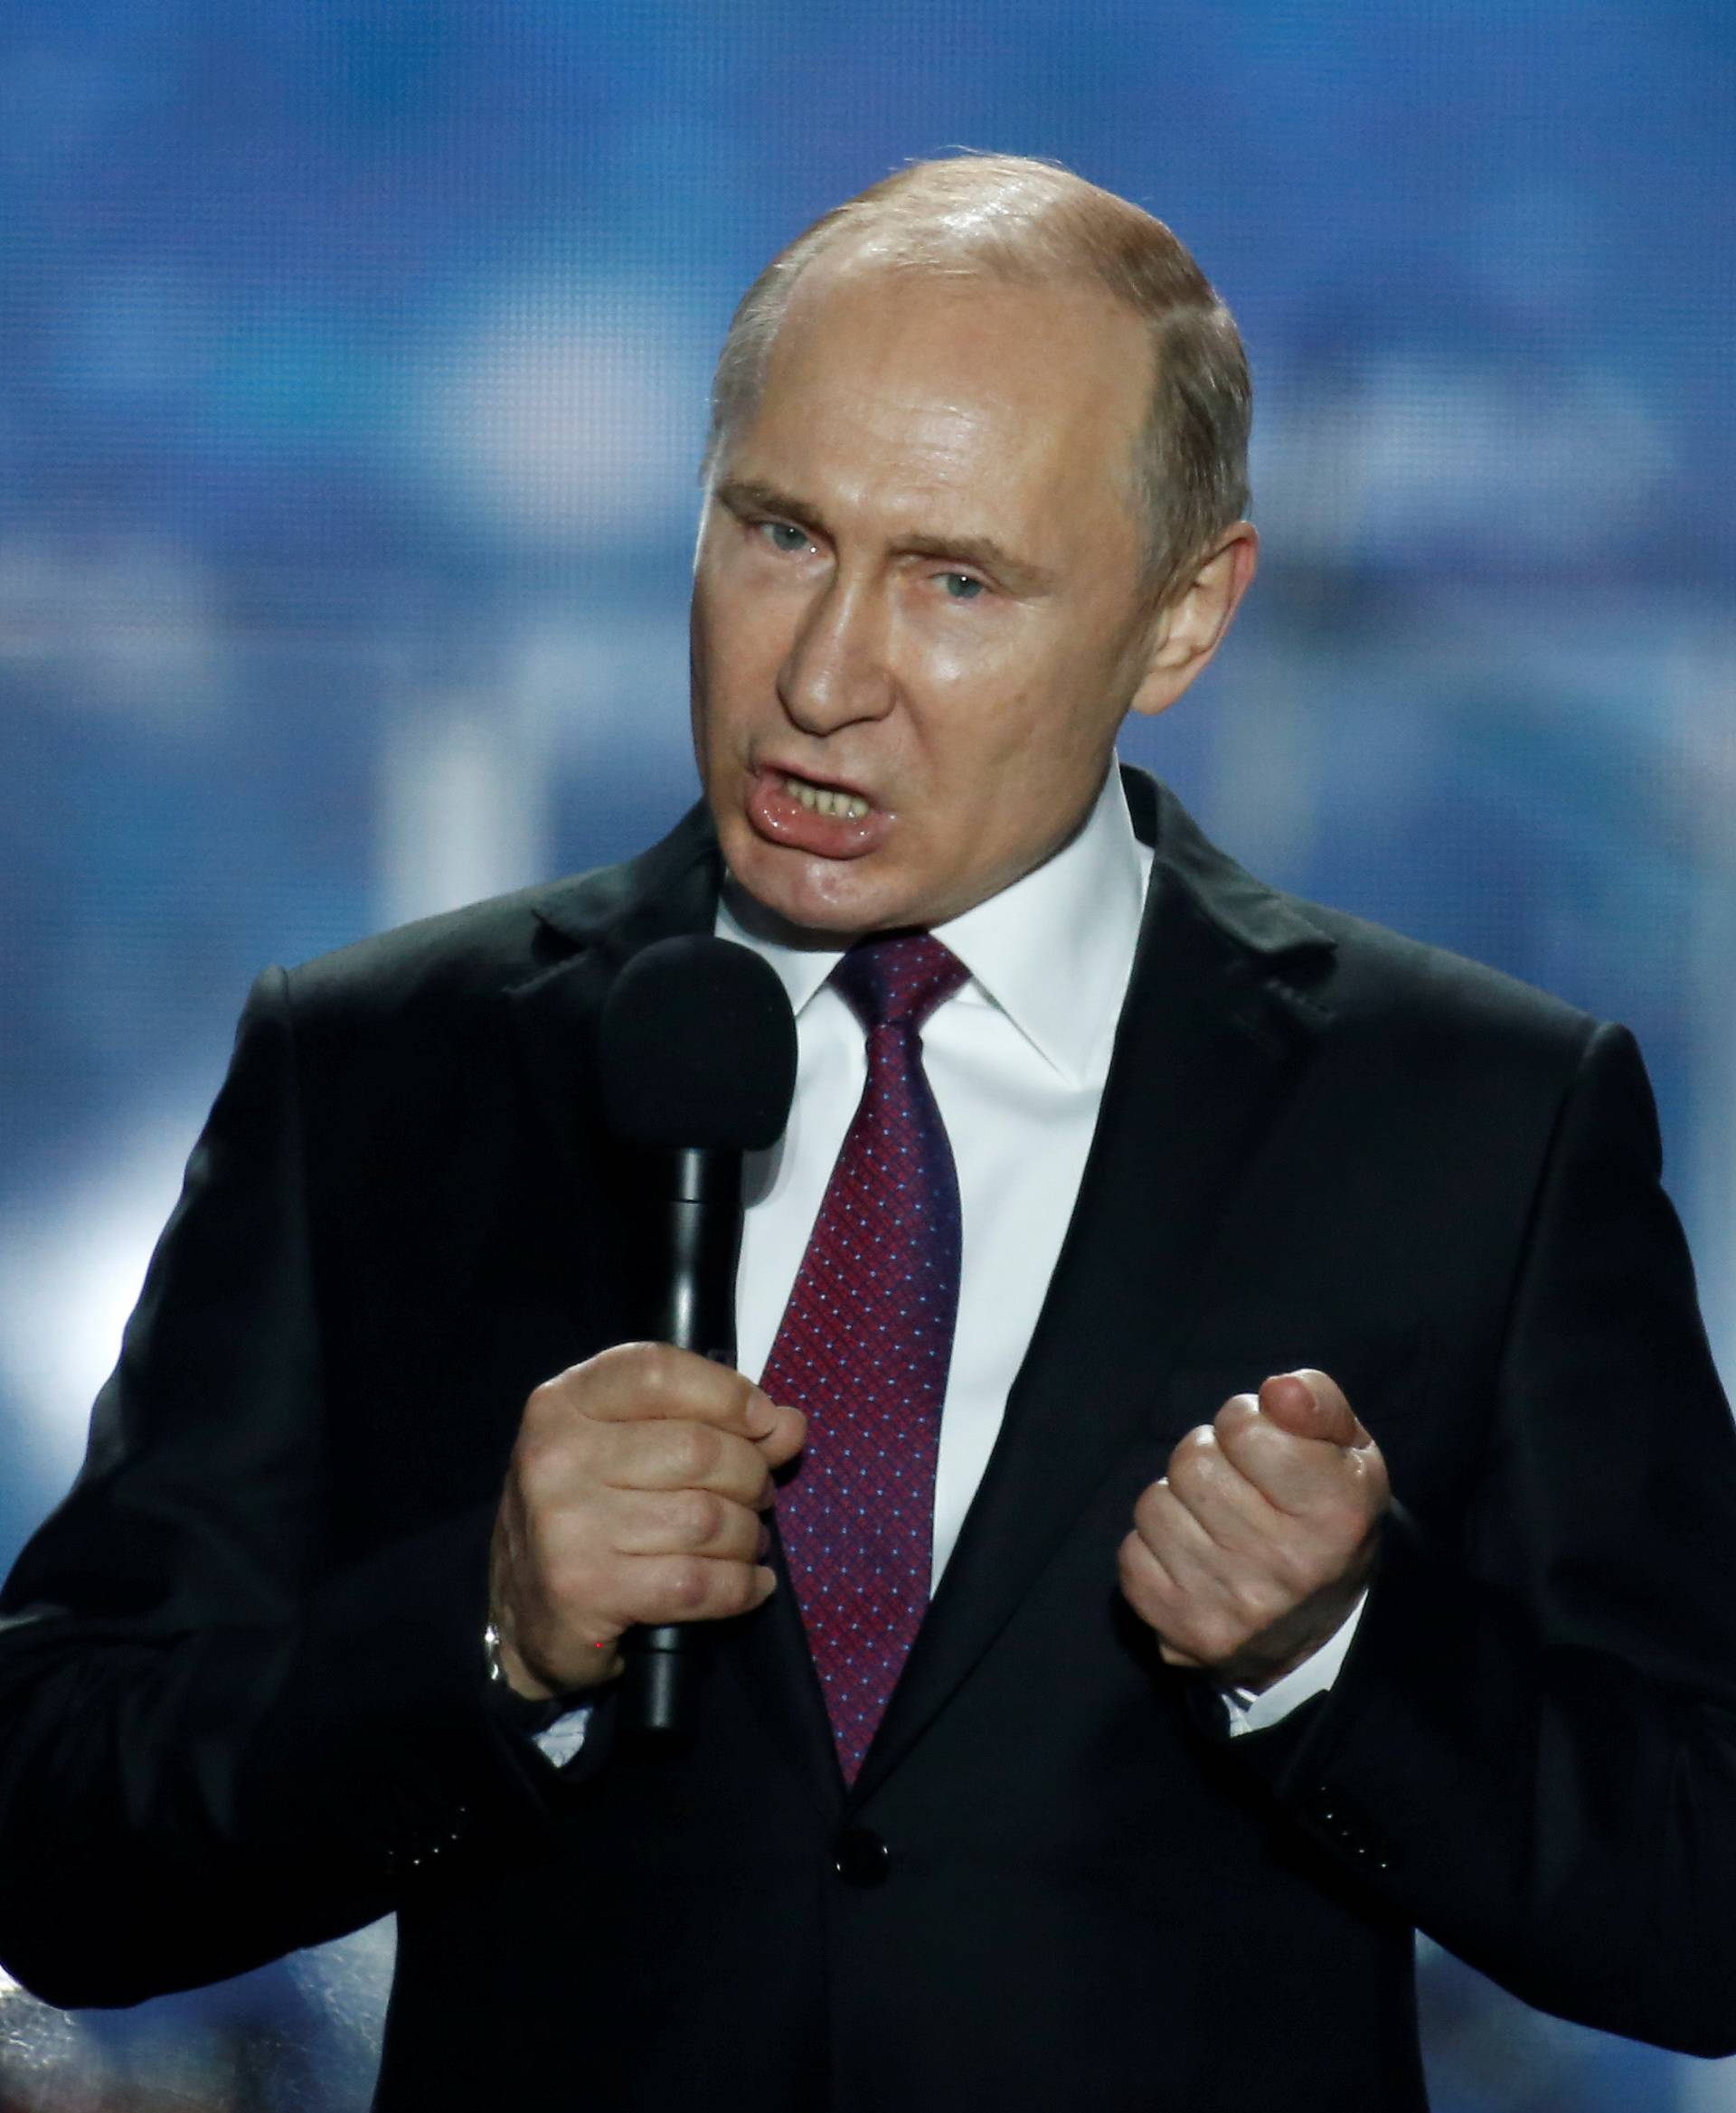 Russian president Vladimir Putin addresses the audience during a rally marking the fourth anniversary of Russia's annexation of Ukraine's Crimea region in the Black Sea port of Sevastopol